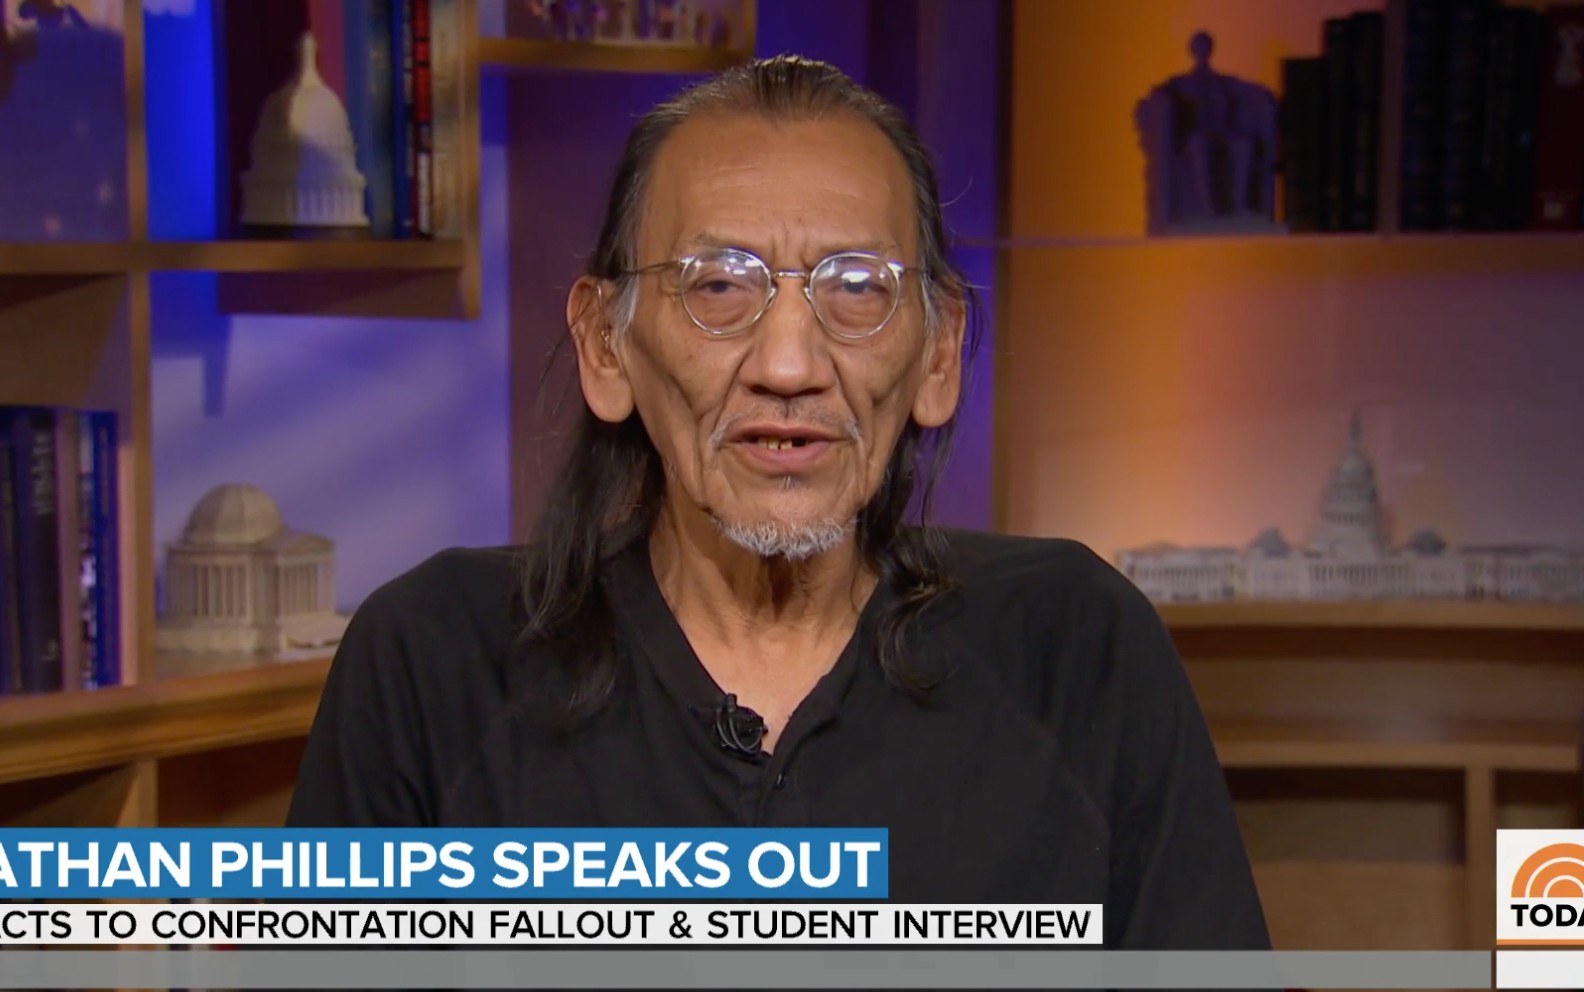 nathan-phillips-says-covington-student-s-explanation-was-coached-up